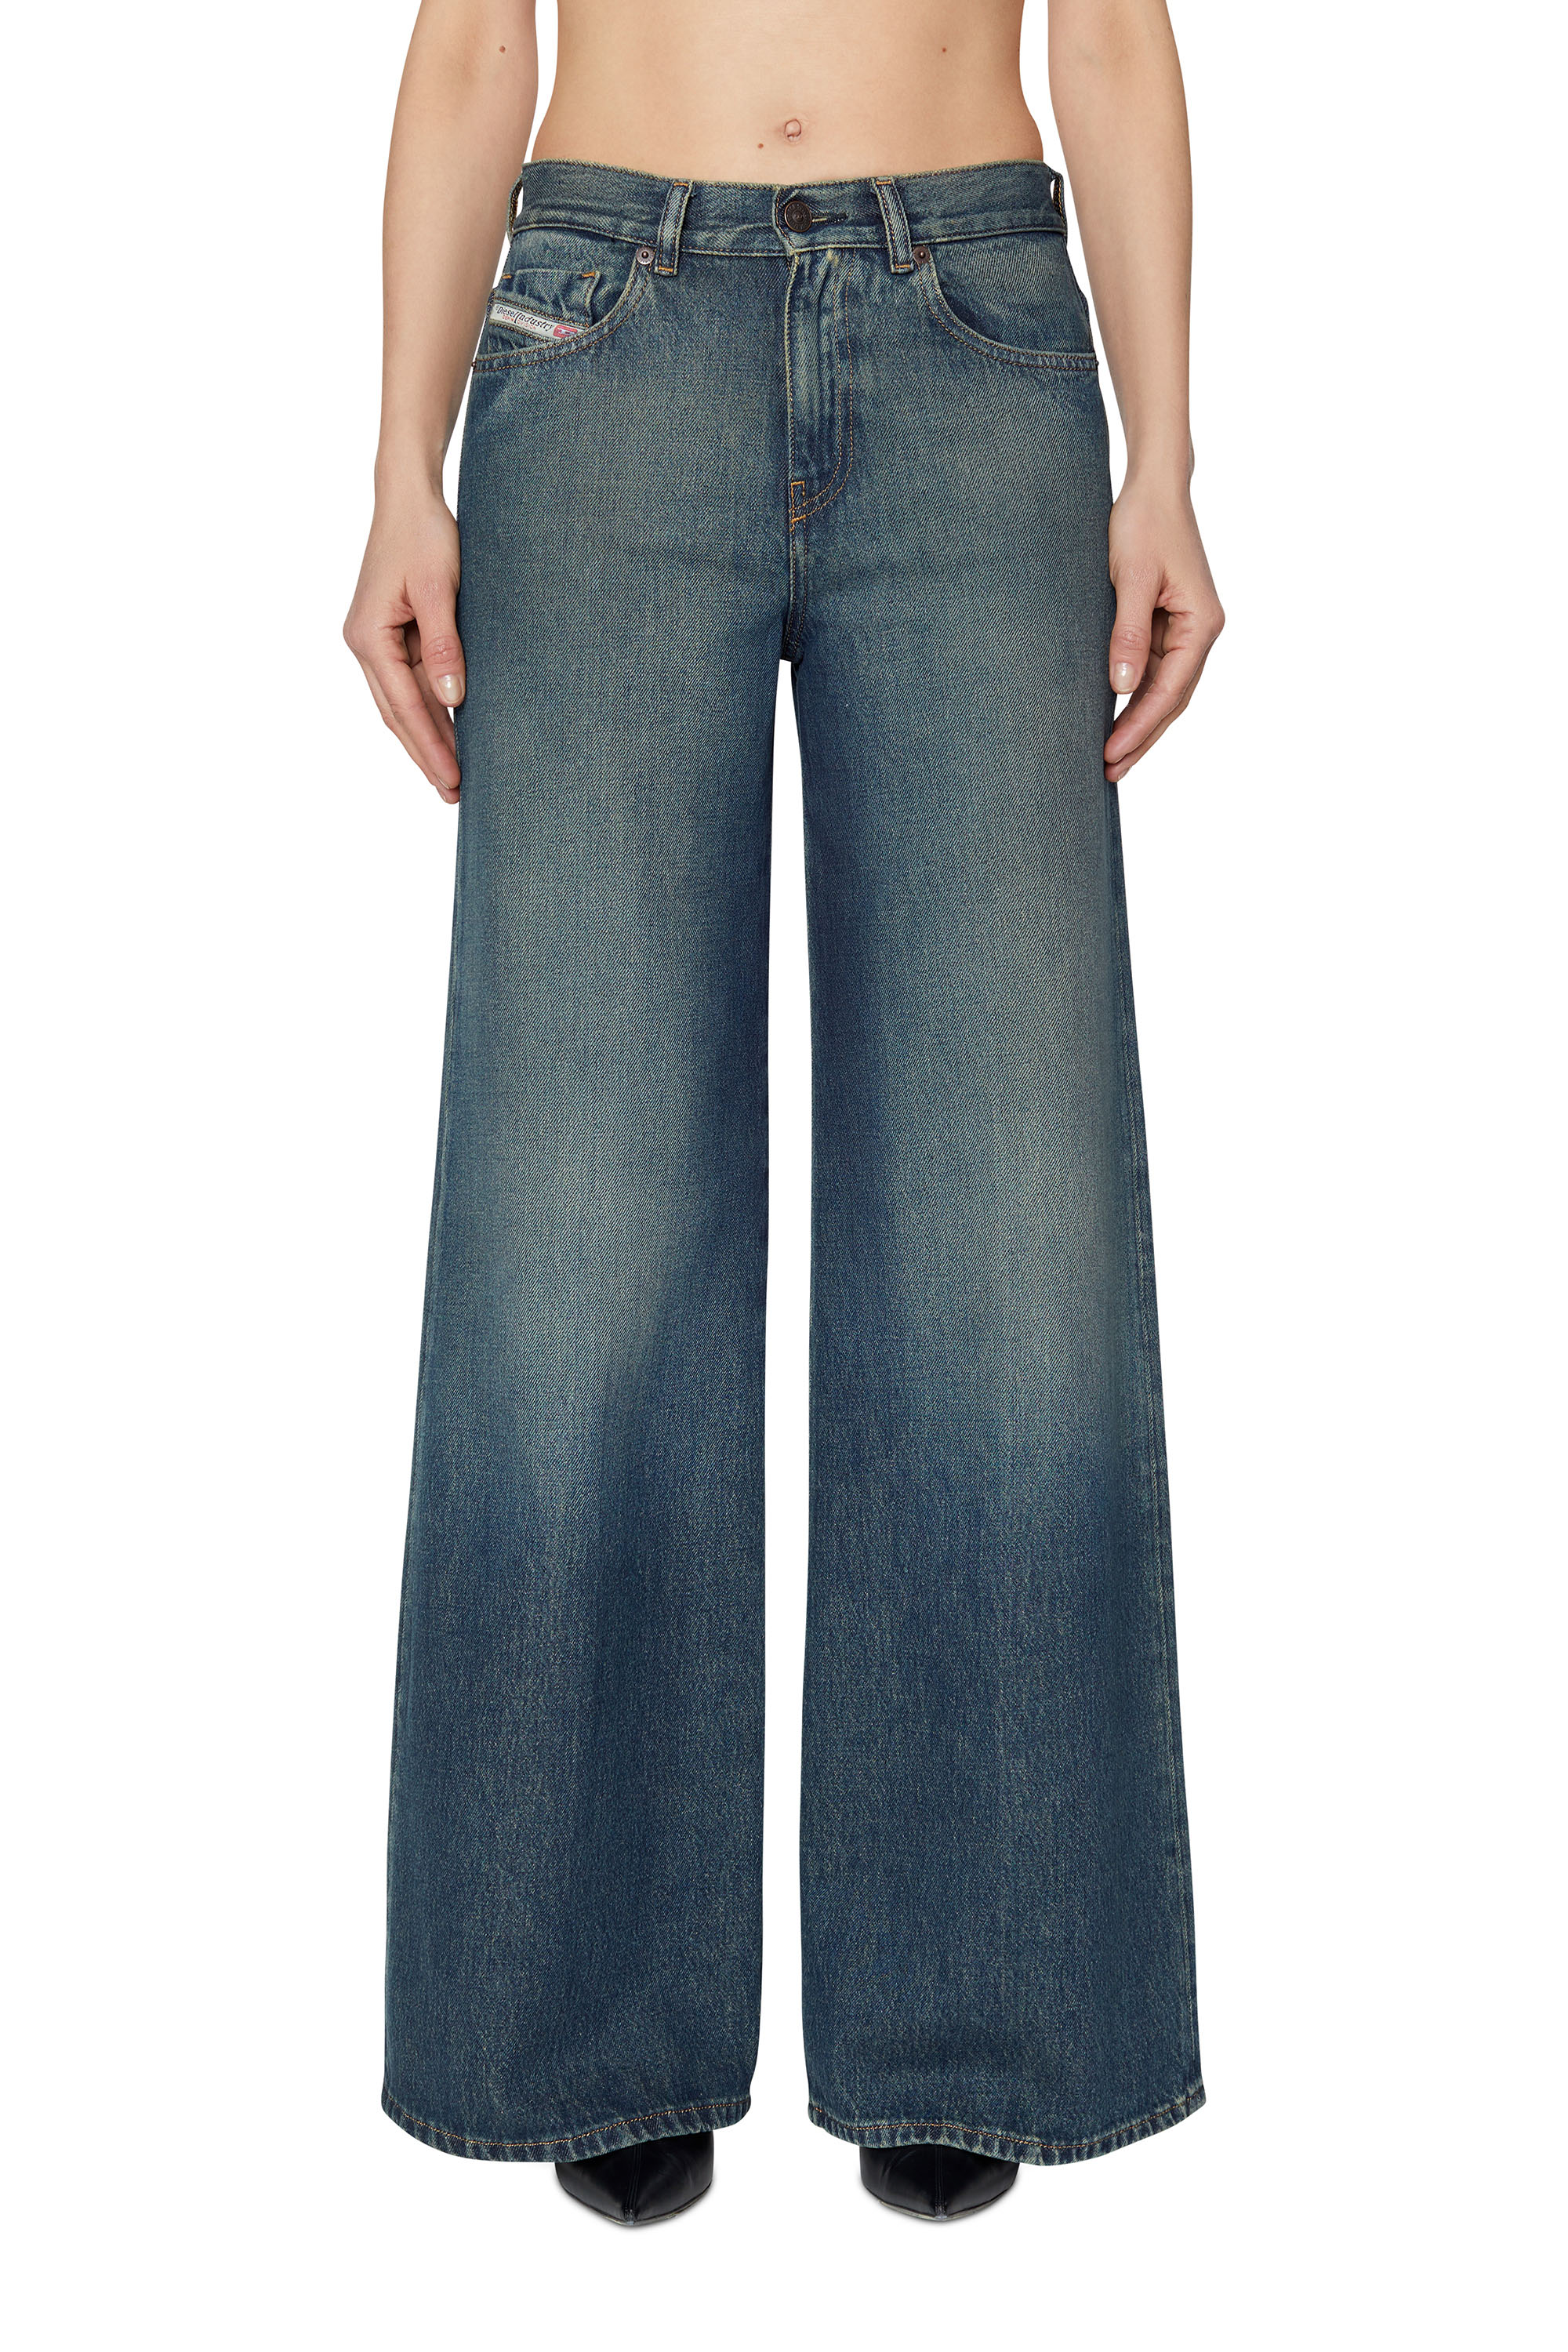 1978 09C04 Bootcut and Flare Jeans, Dark Blue - Jeans